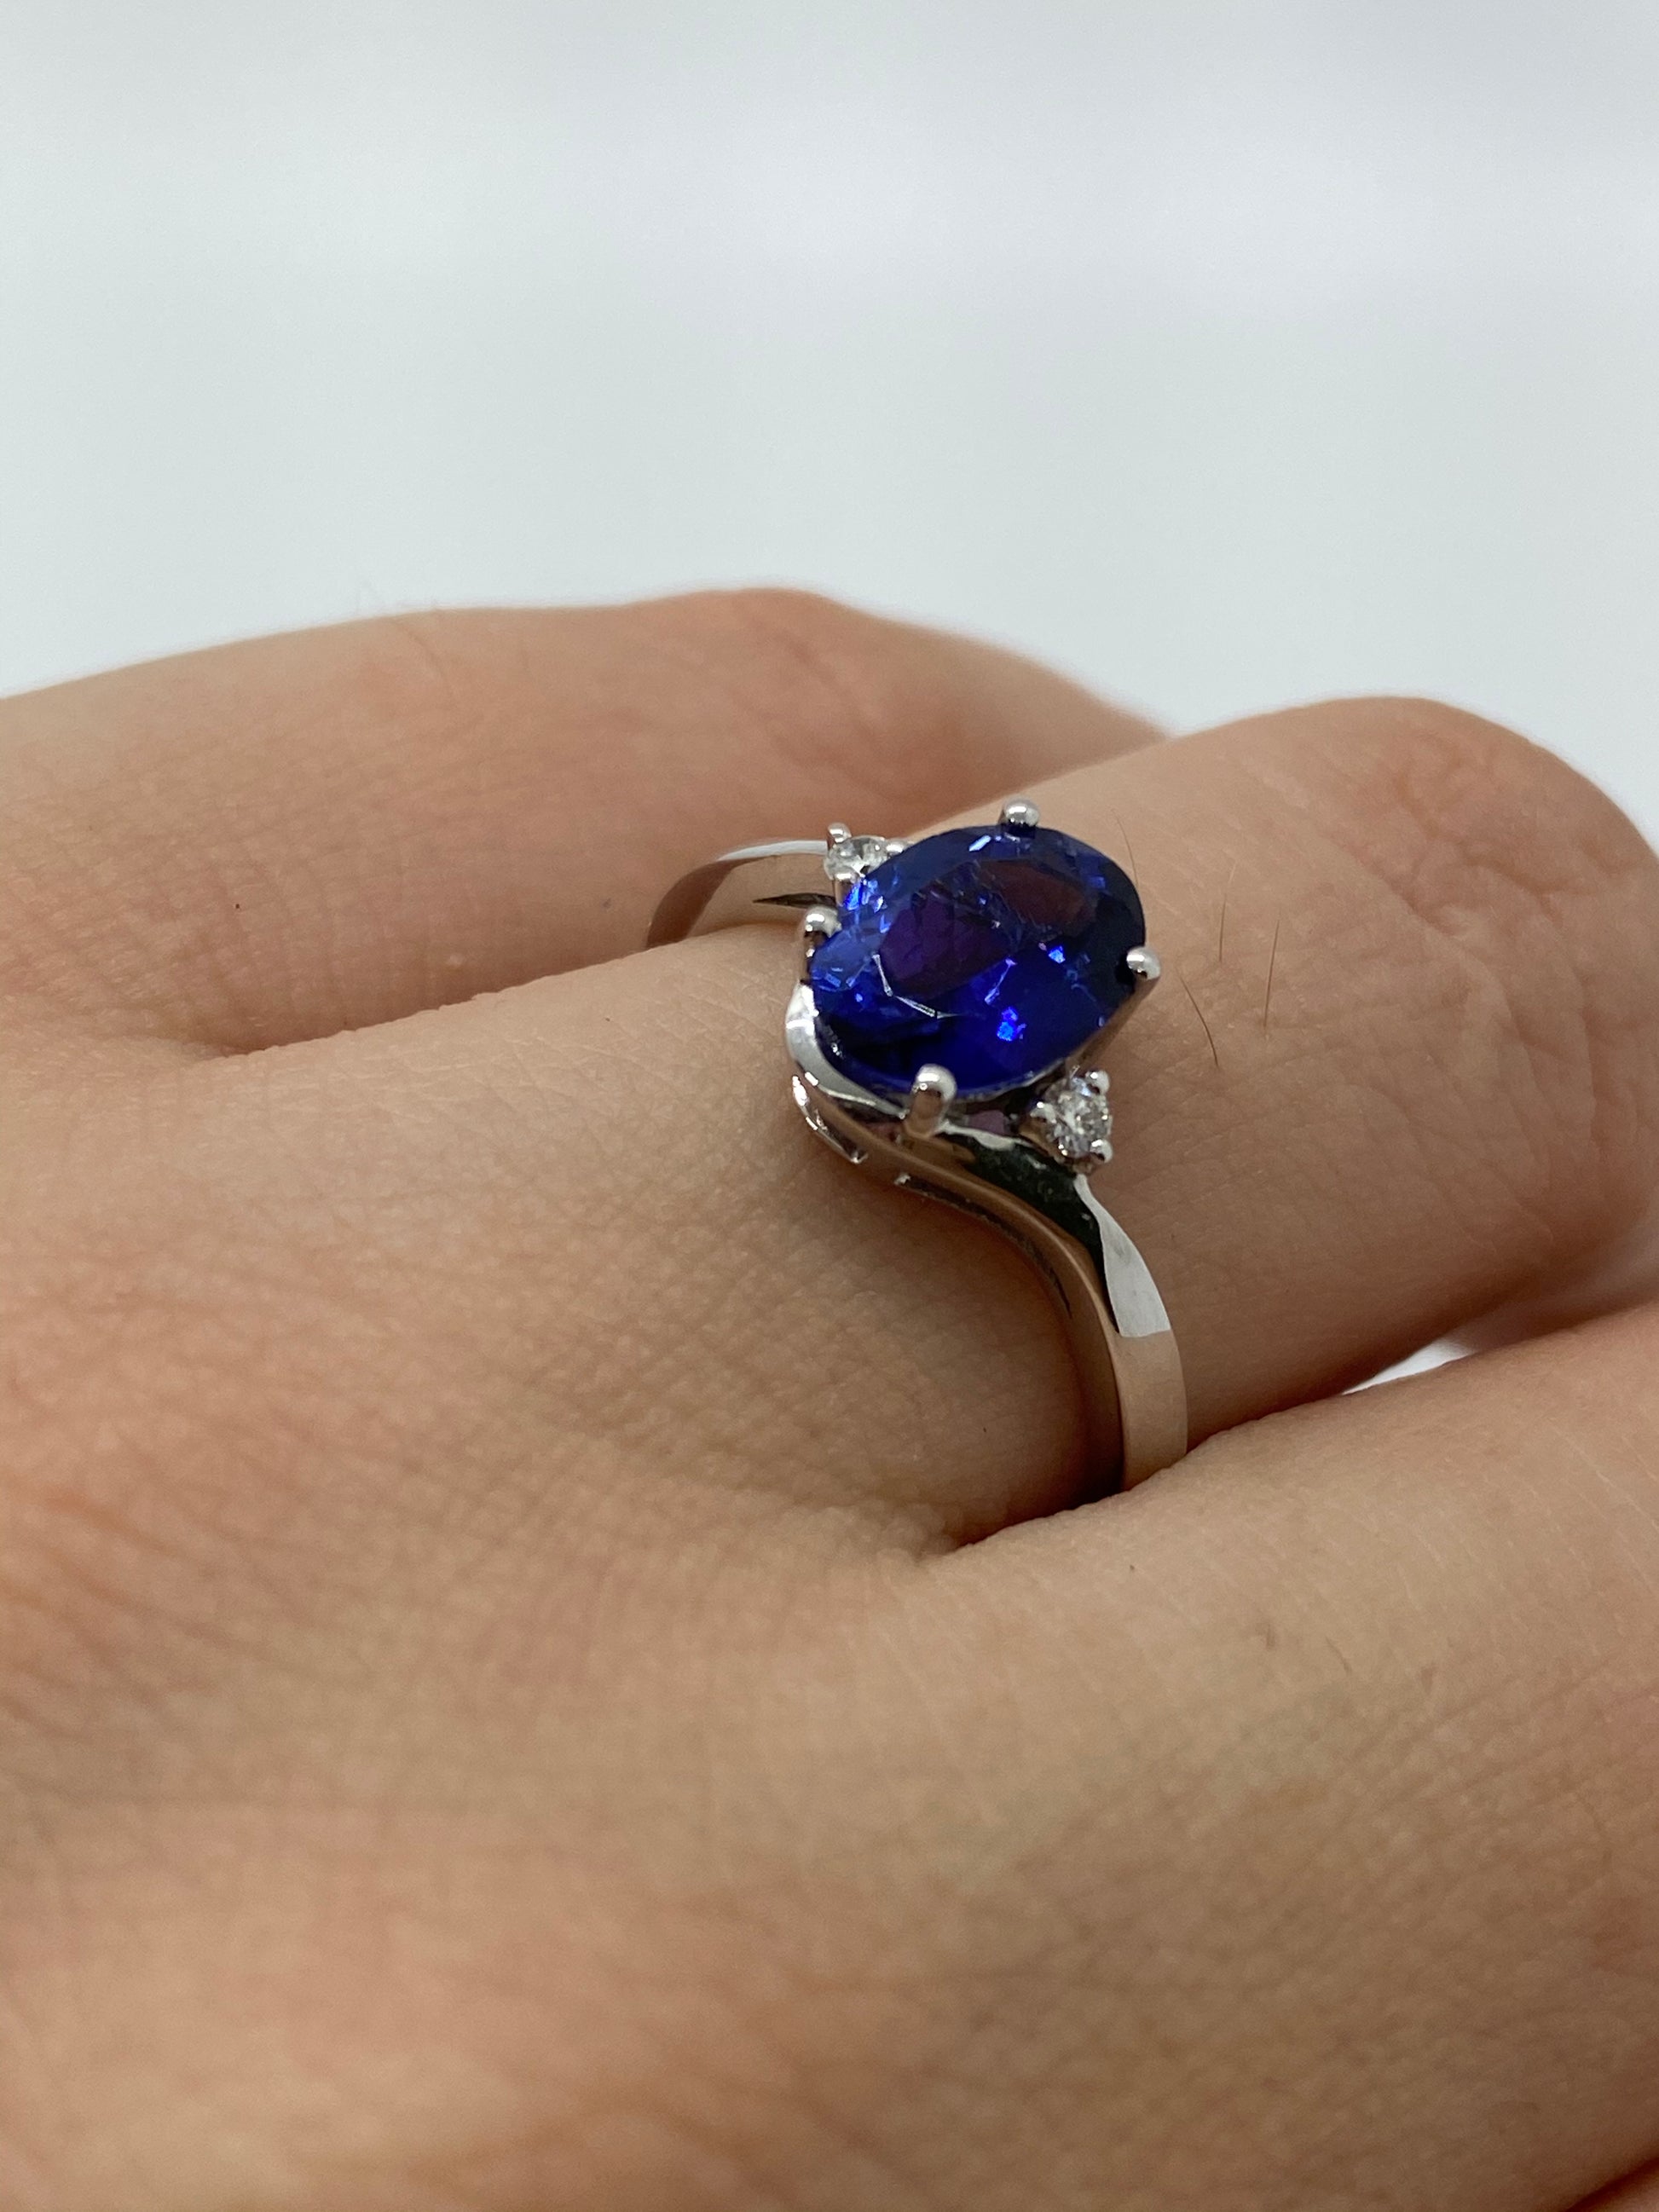 Tanzanite Ring R20338 - Royal Gems and Jewelry